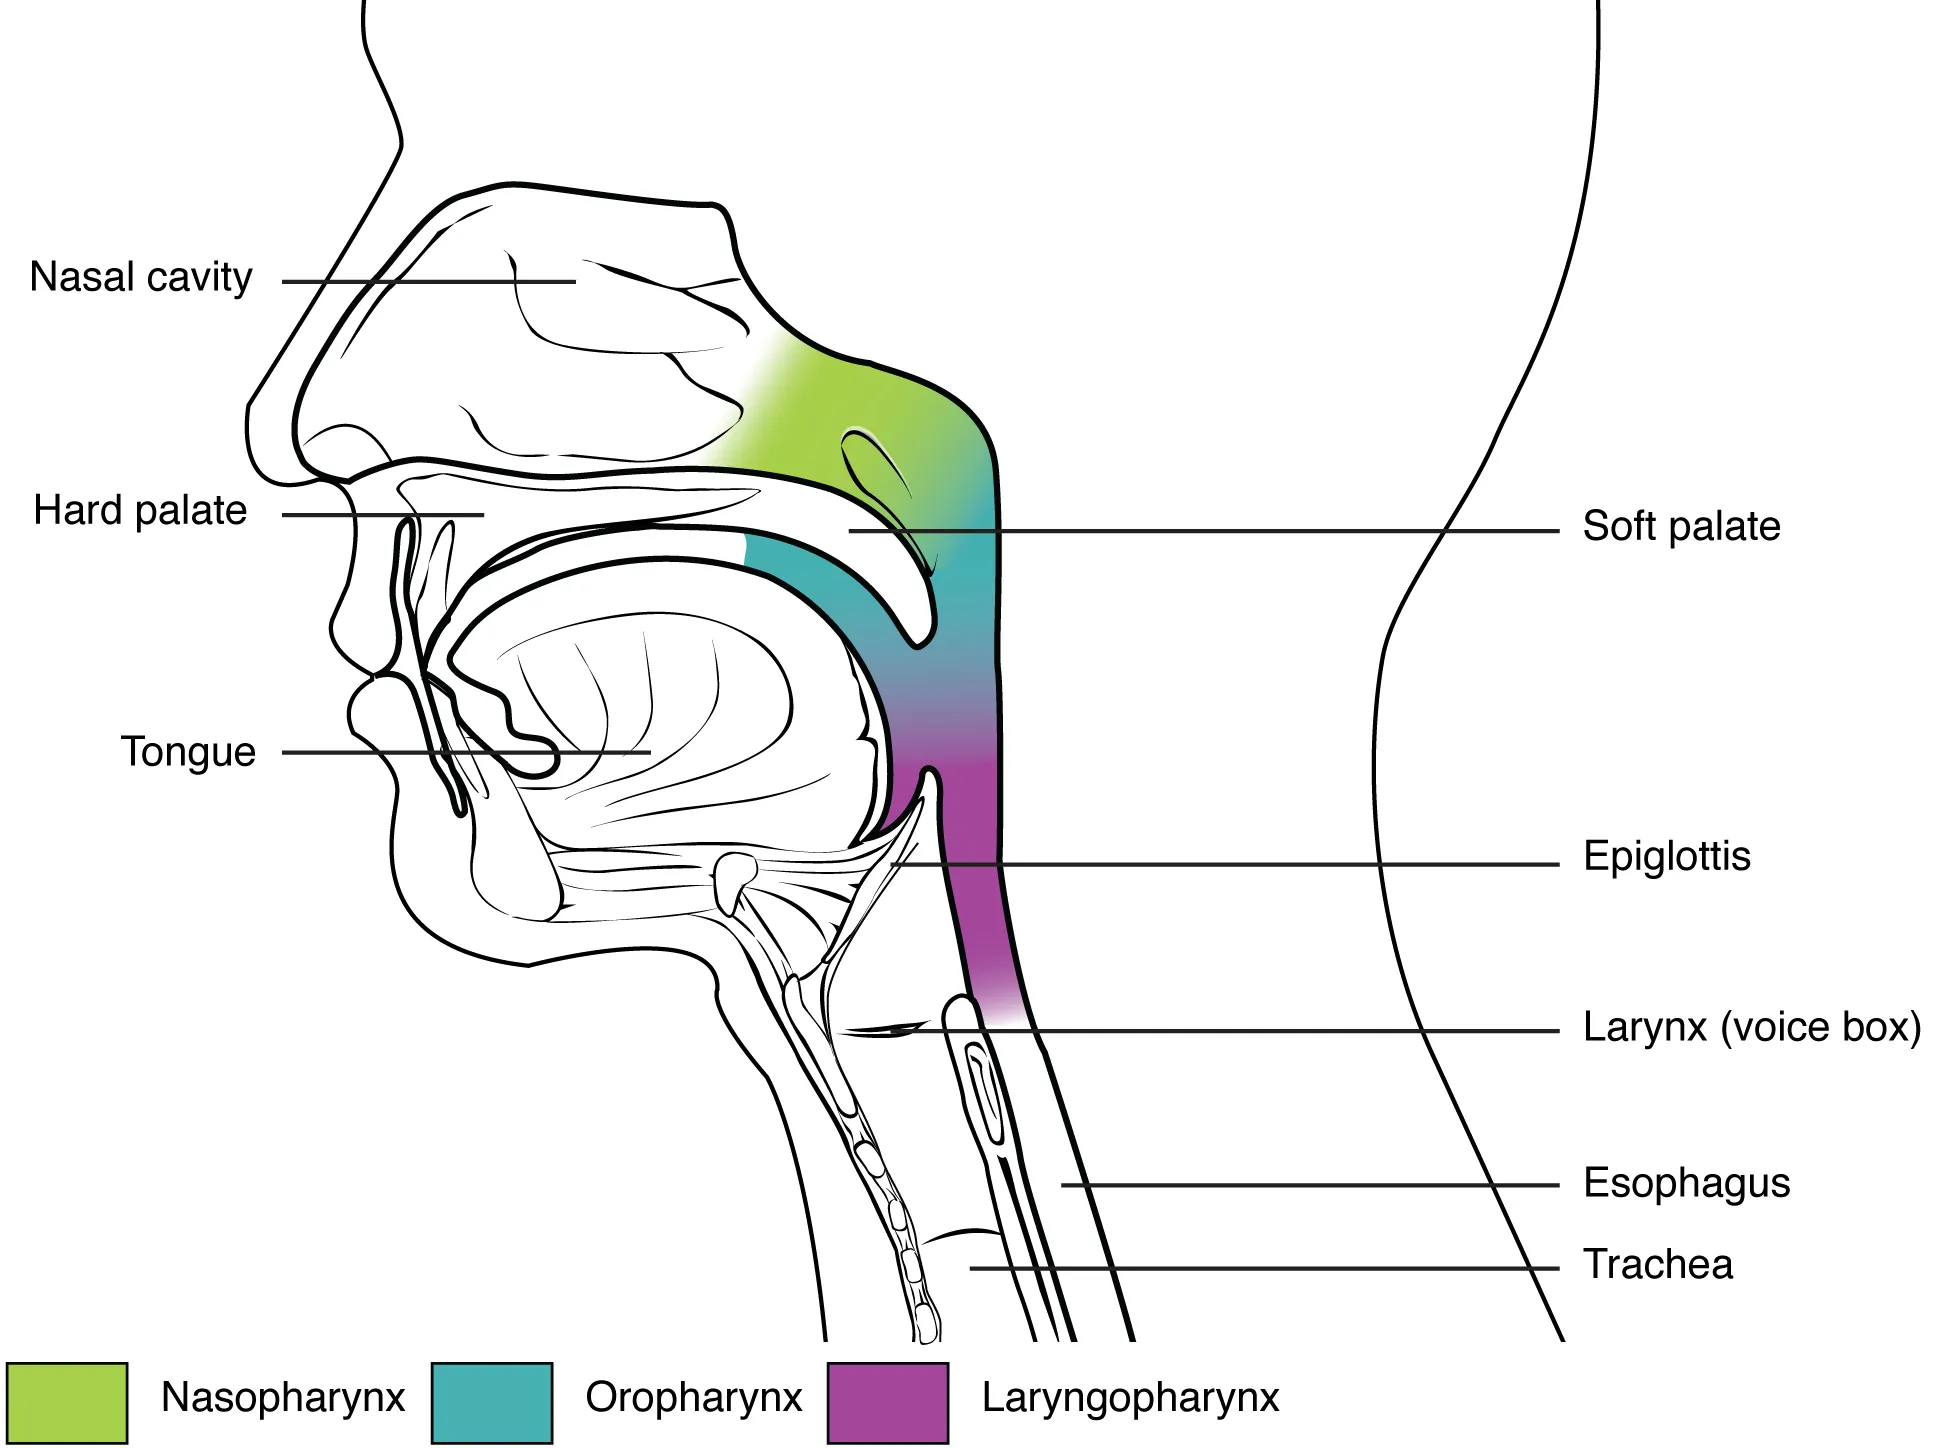 This figure shows the side view of the face. The different parts of the pharynx are color-coded and labeled.